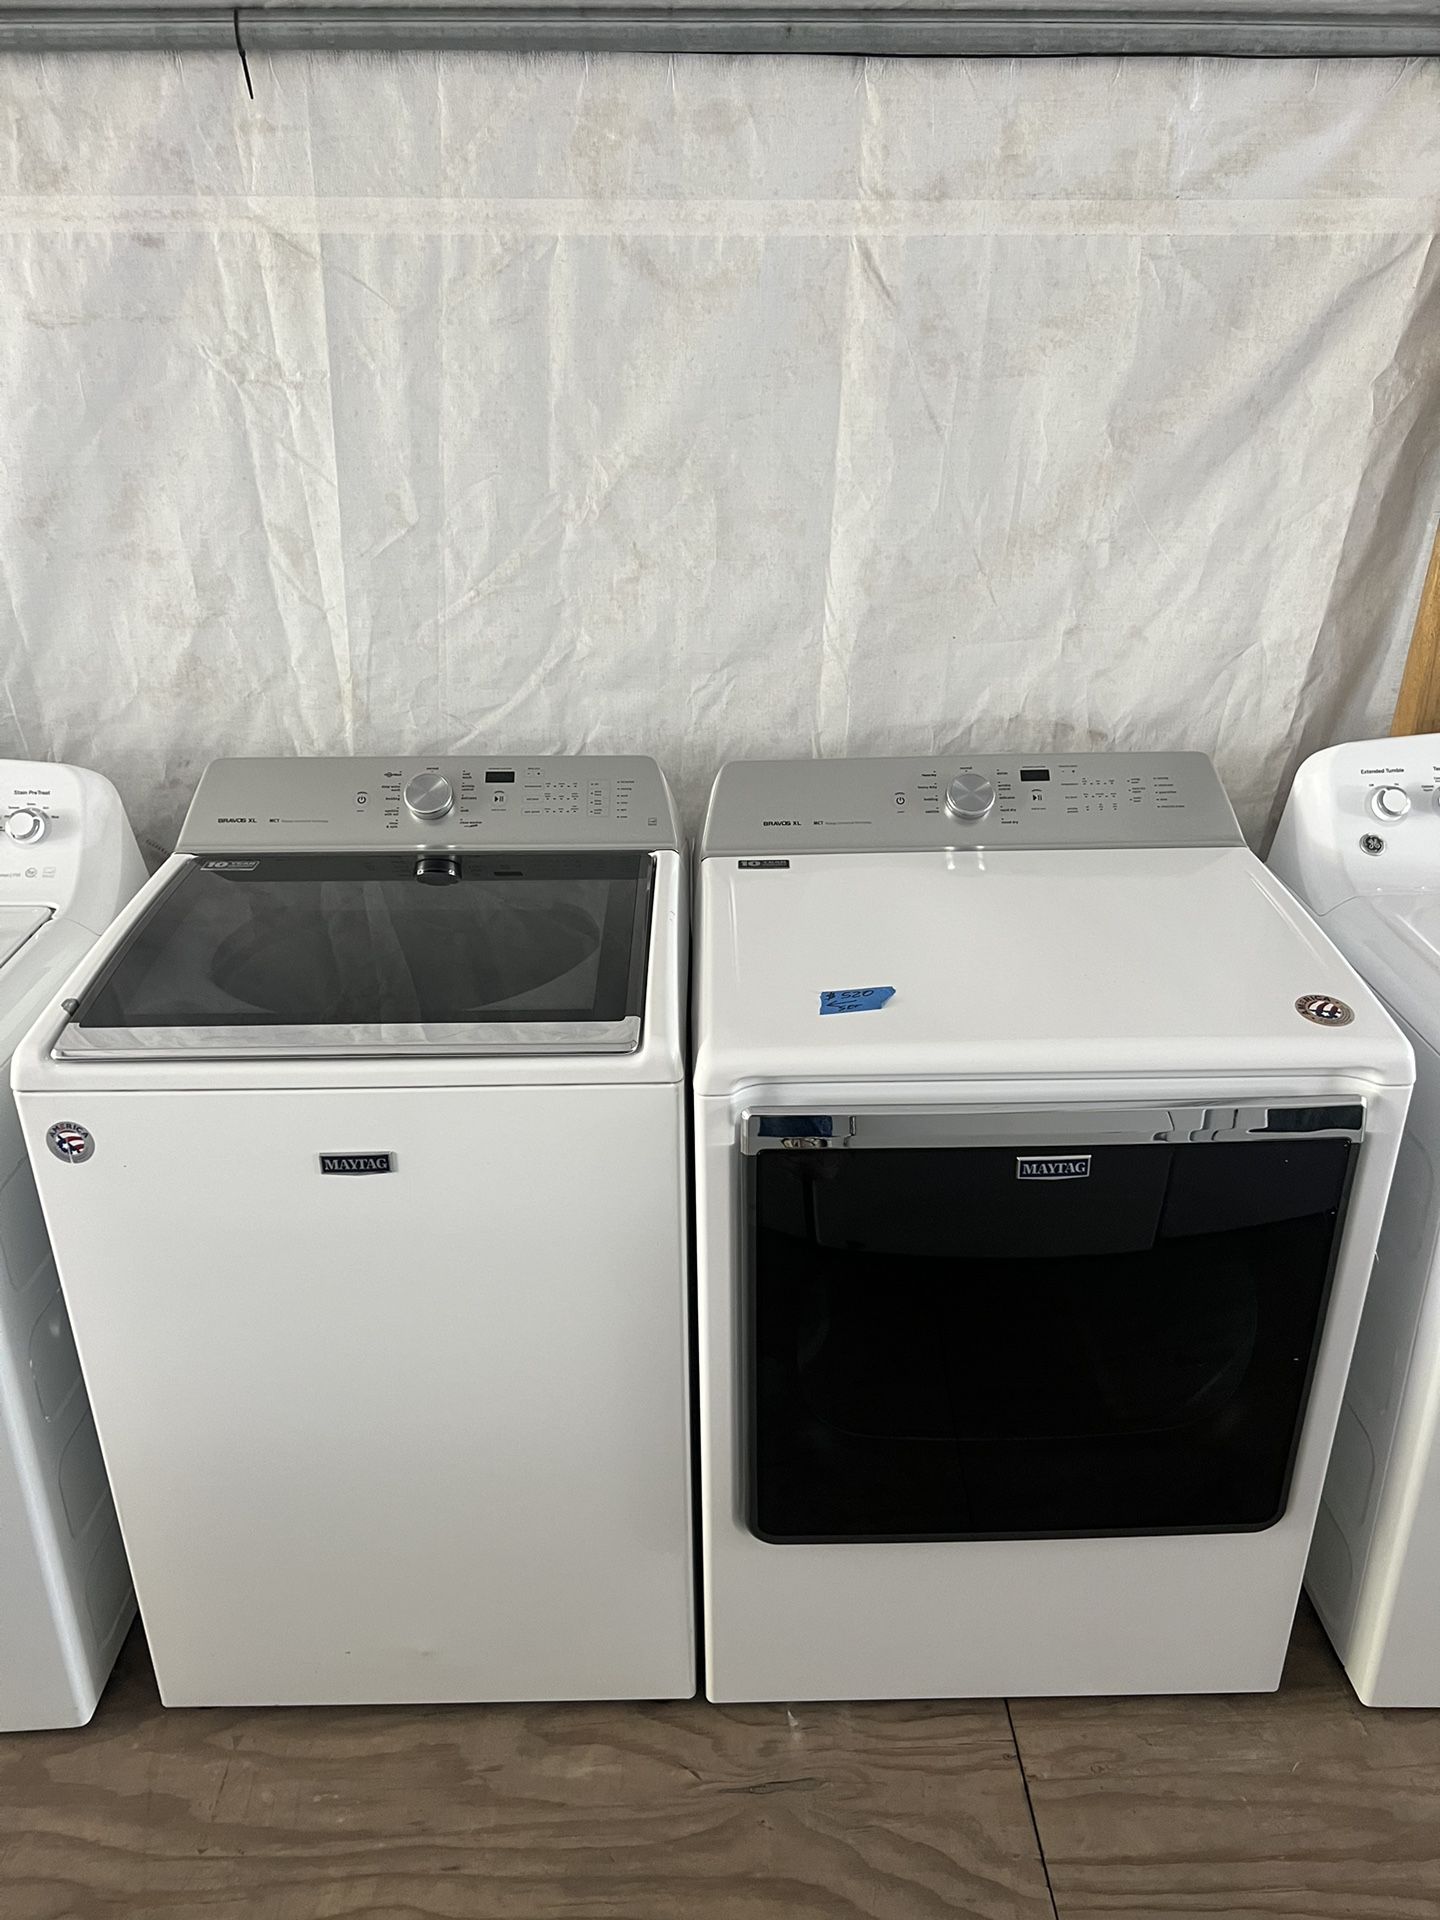 Maytag Washer&dryer Large Capacity Set    60 day warranty/ Located at:📍5415 Carmack Rd Tampa Fl 33610📍